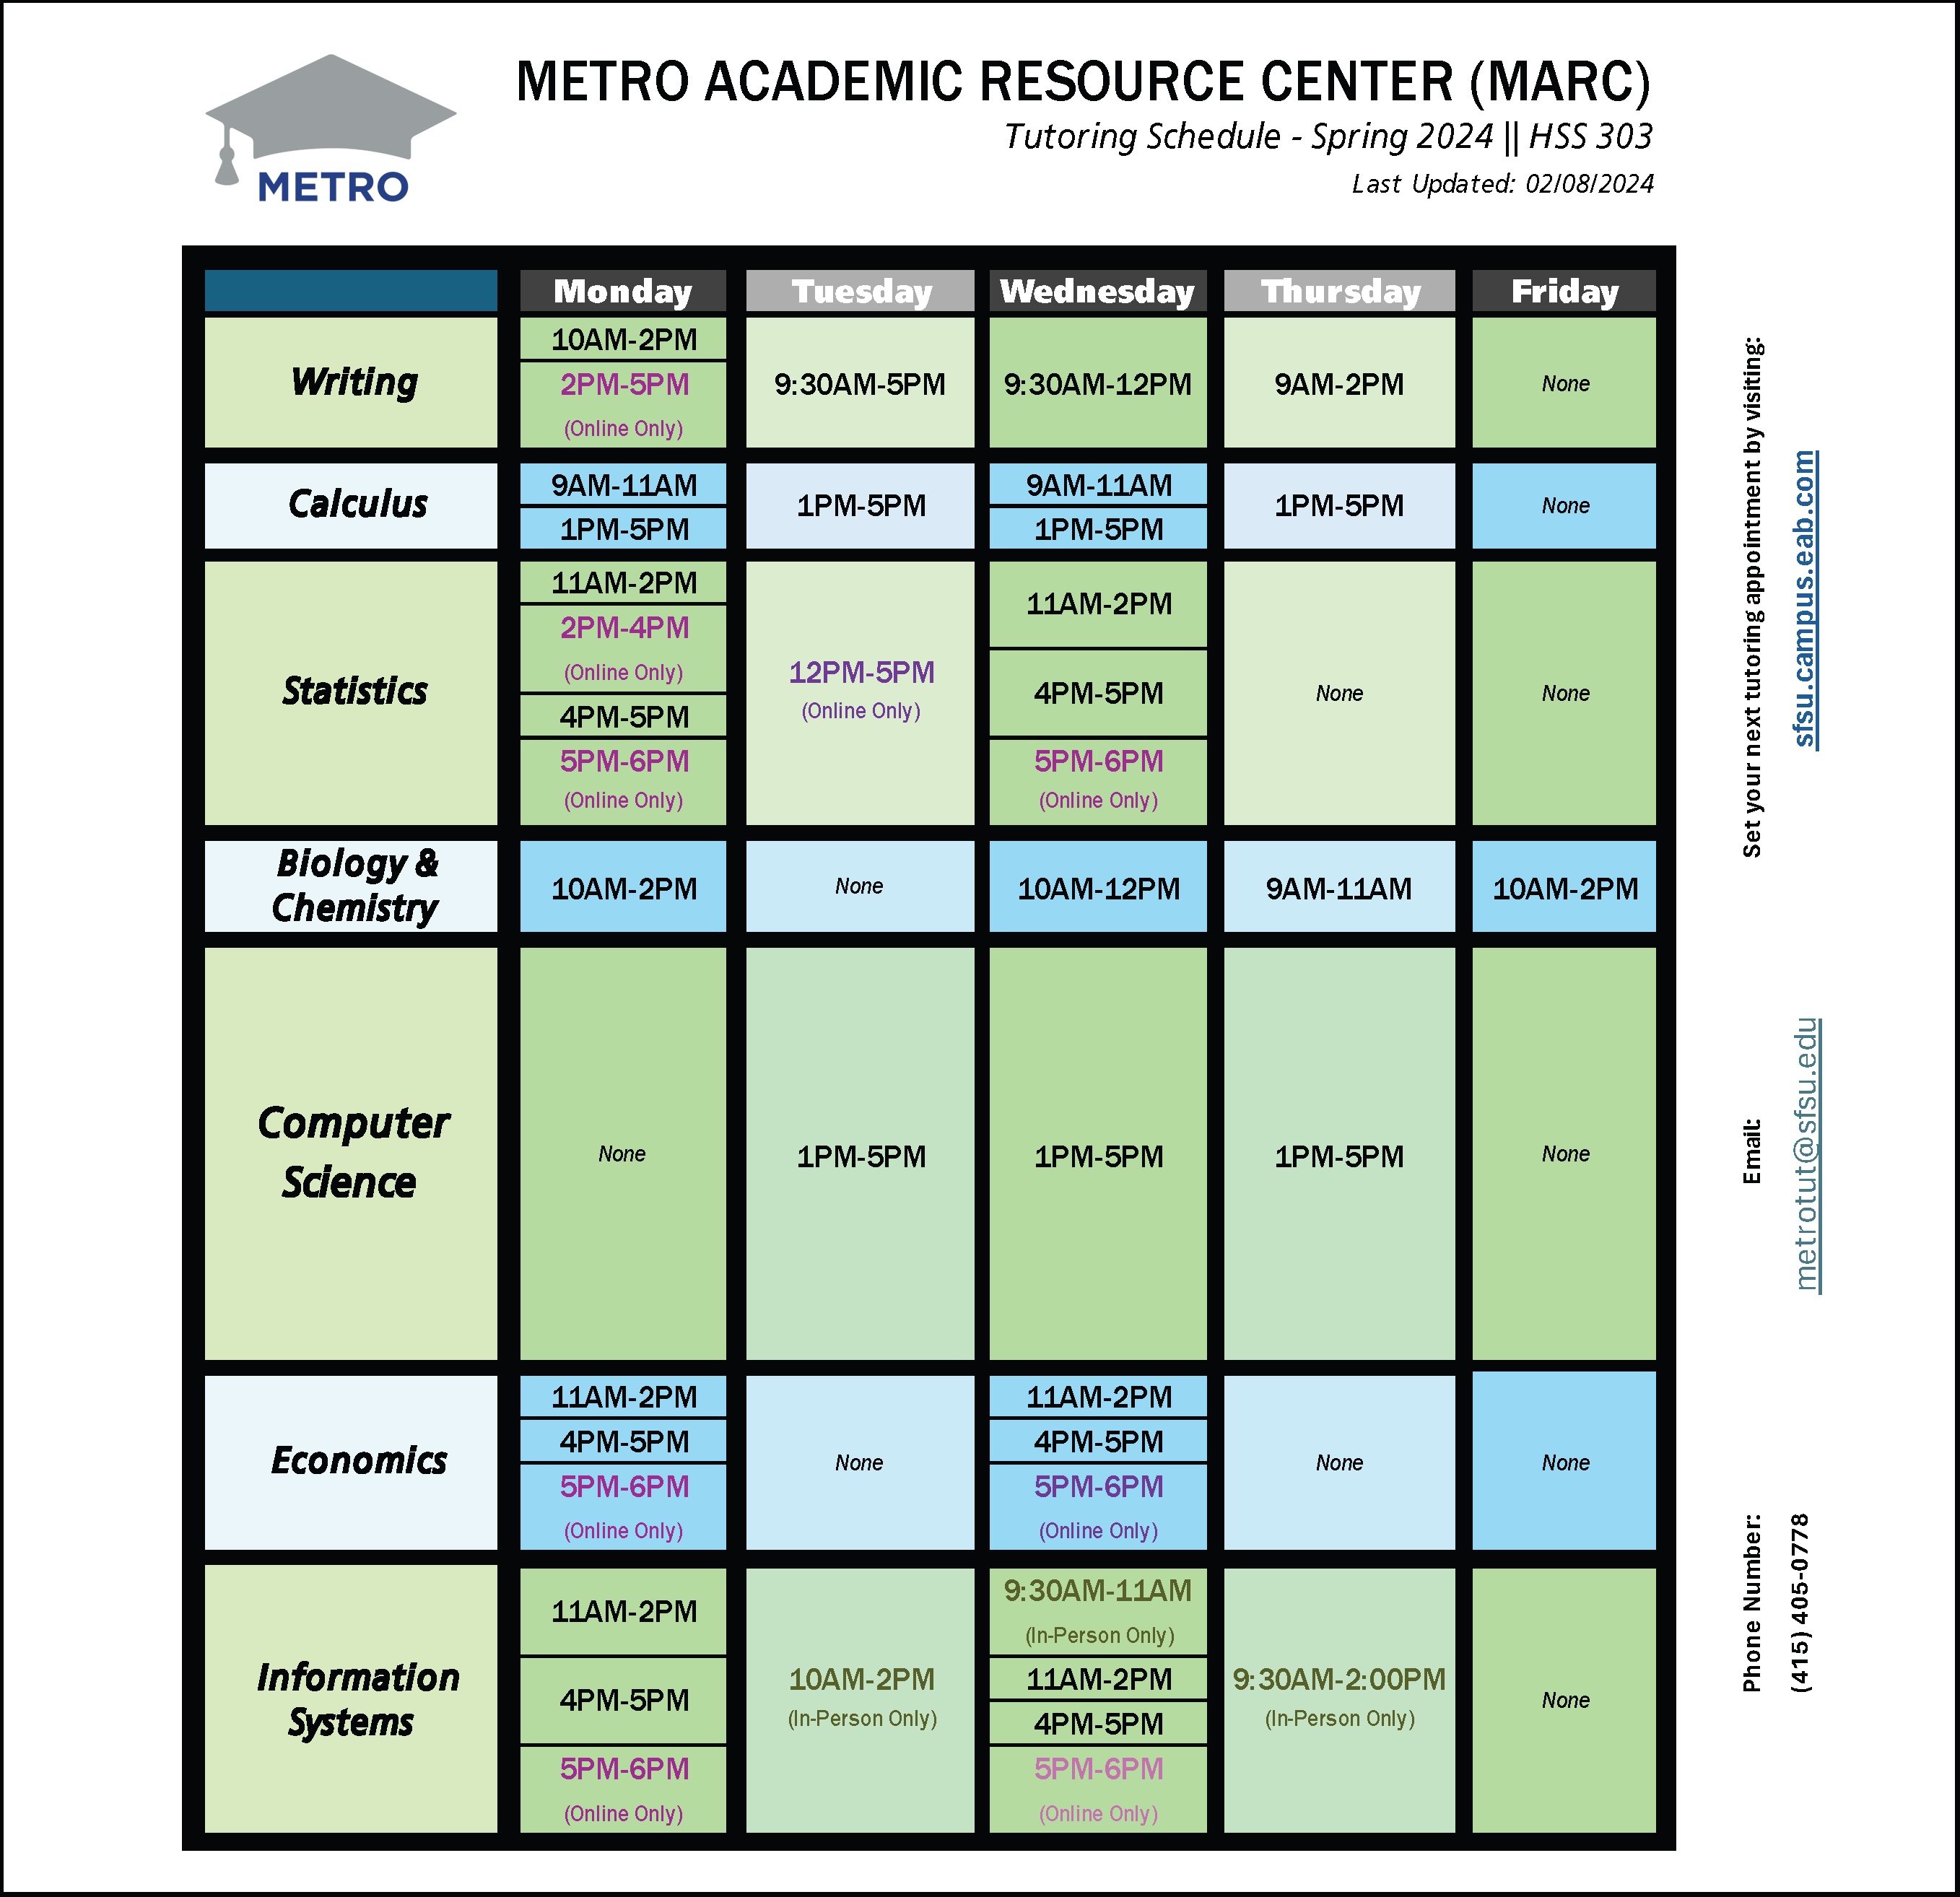 MARC Tutoring Schedule by Subject